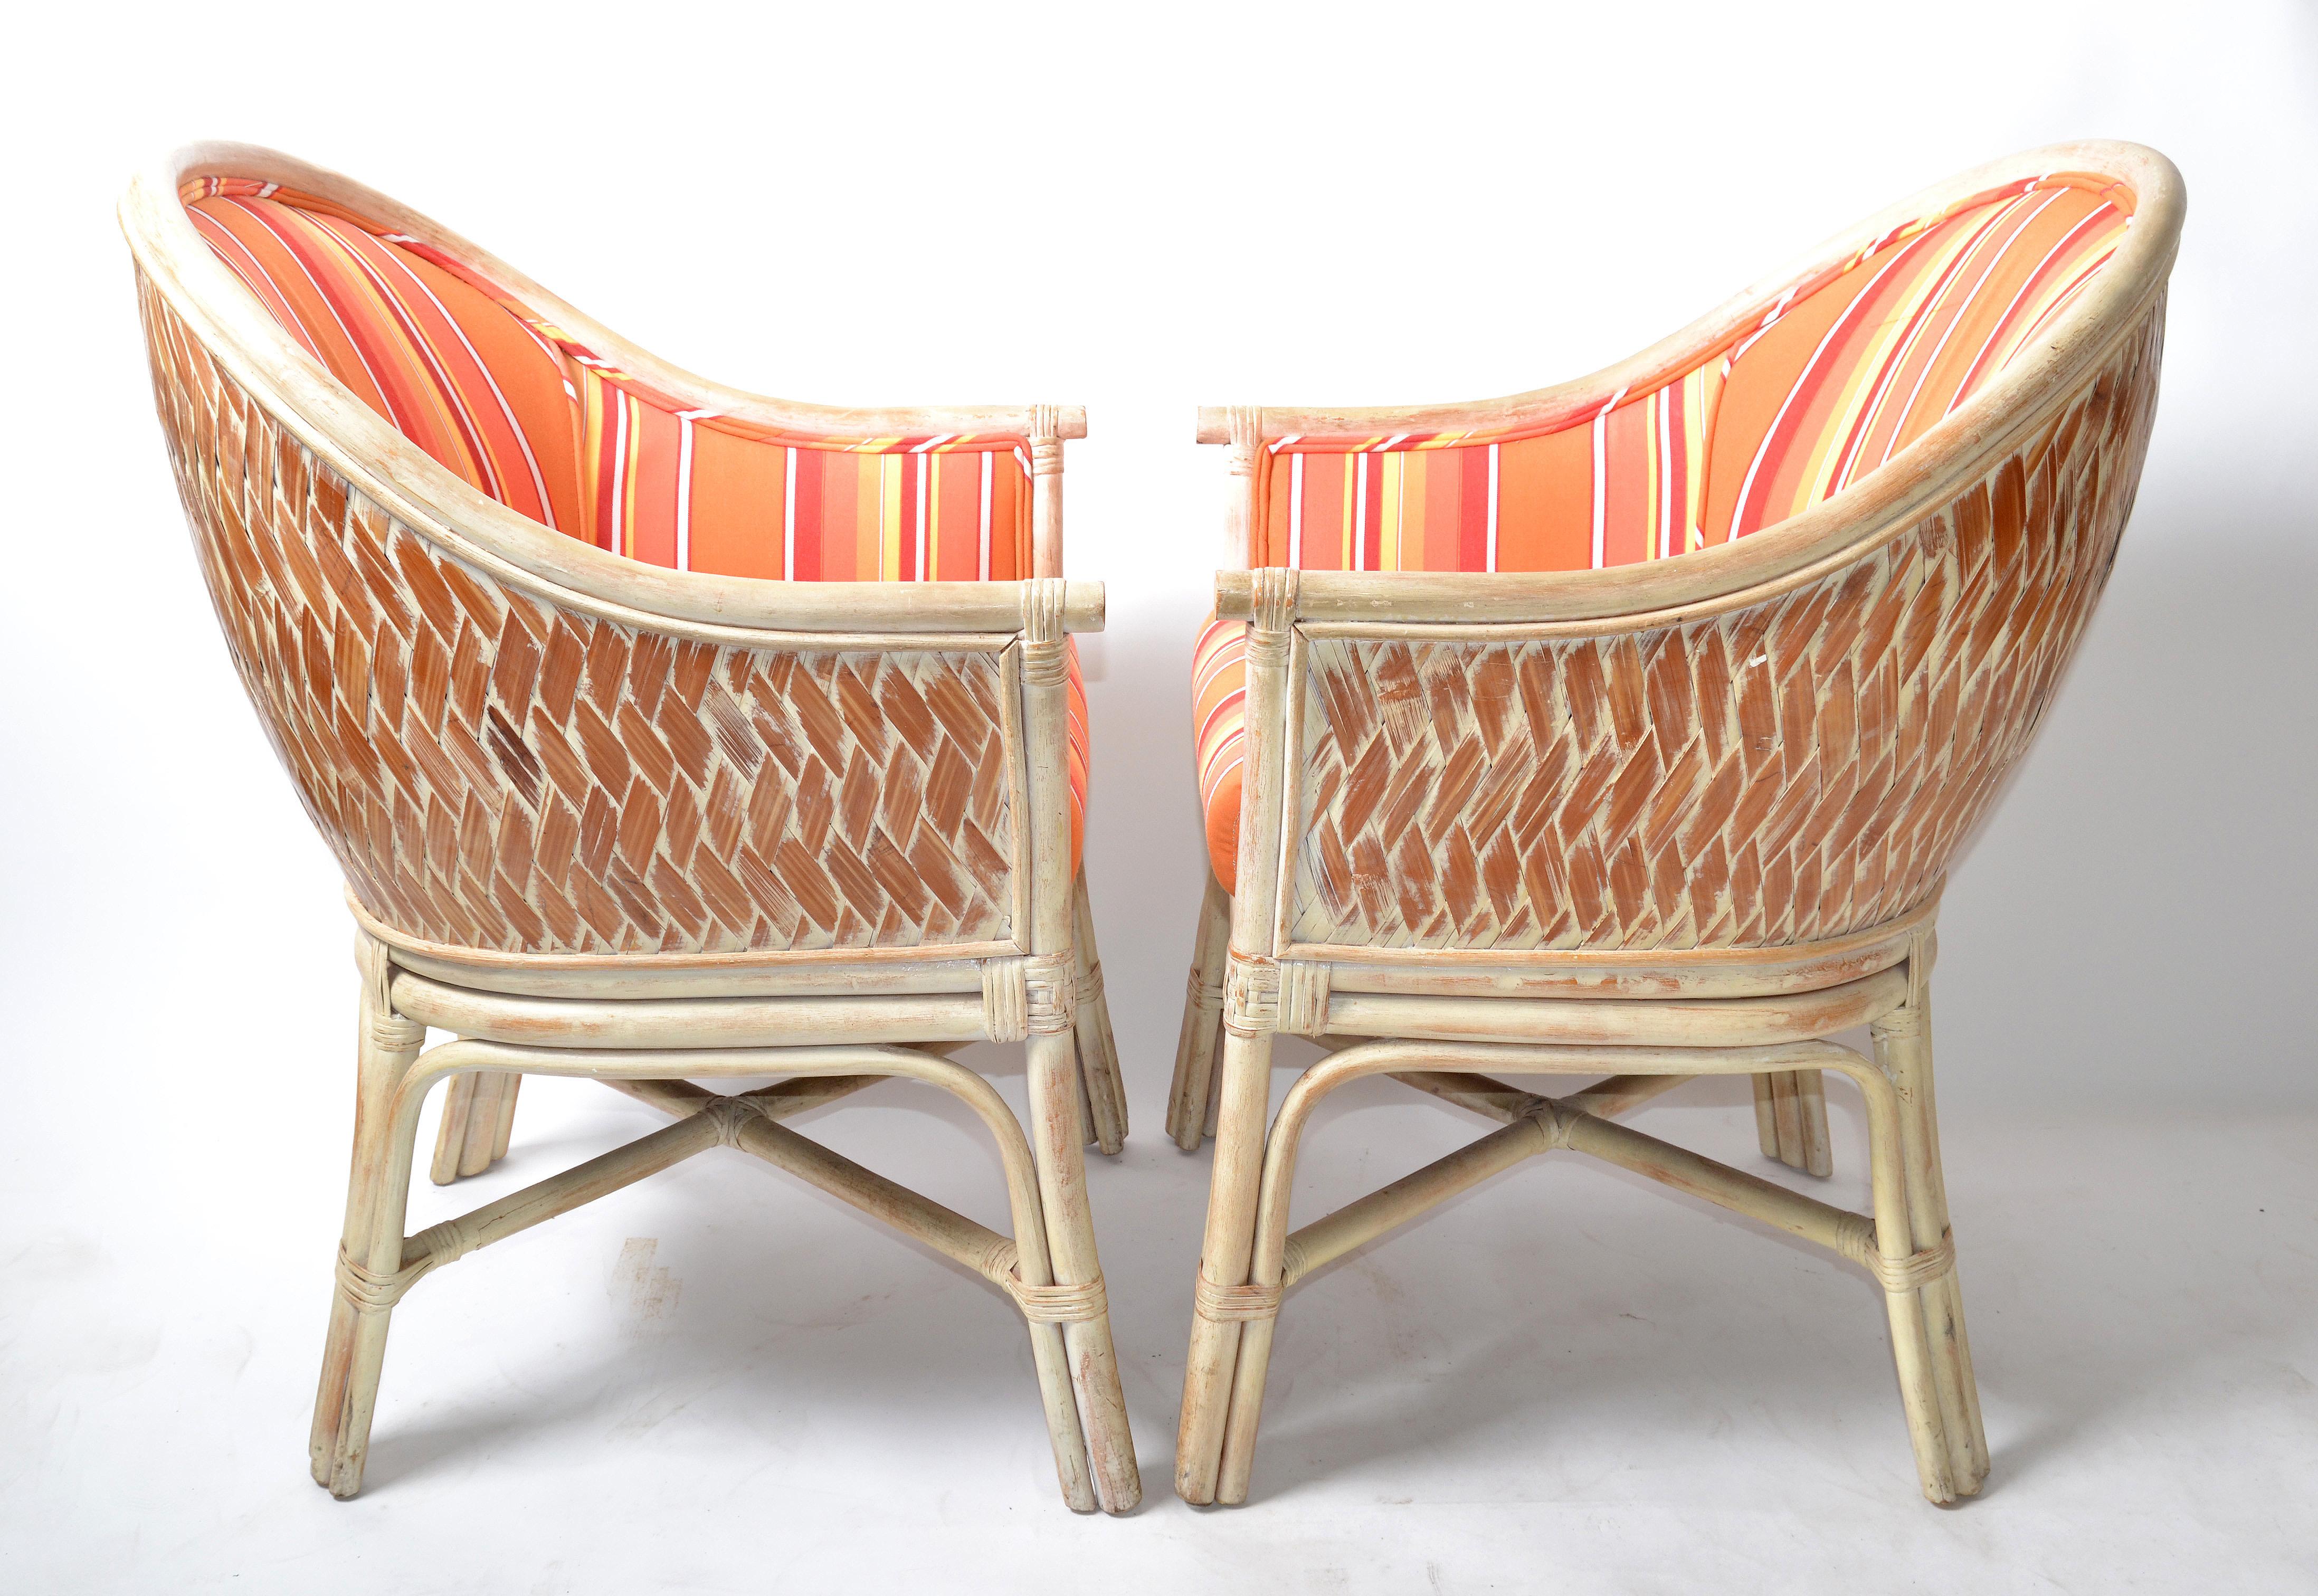 Pair, Mid-Century Modern Bamboo & Cane Armchair Orange Striped Upholstery, 1970 For Sale 8